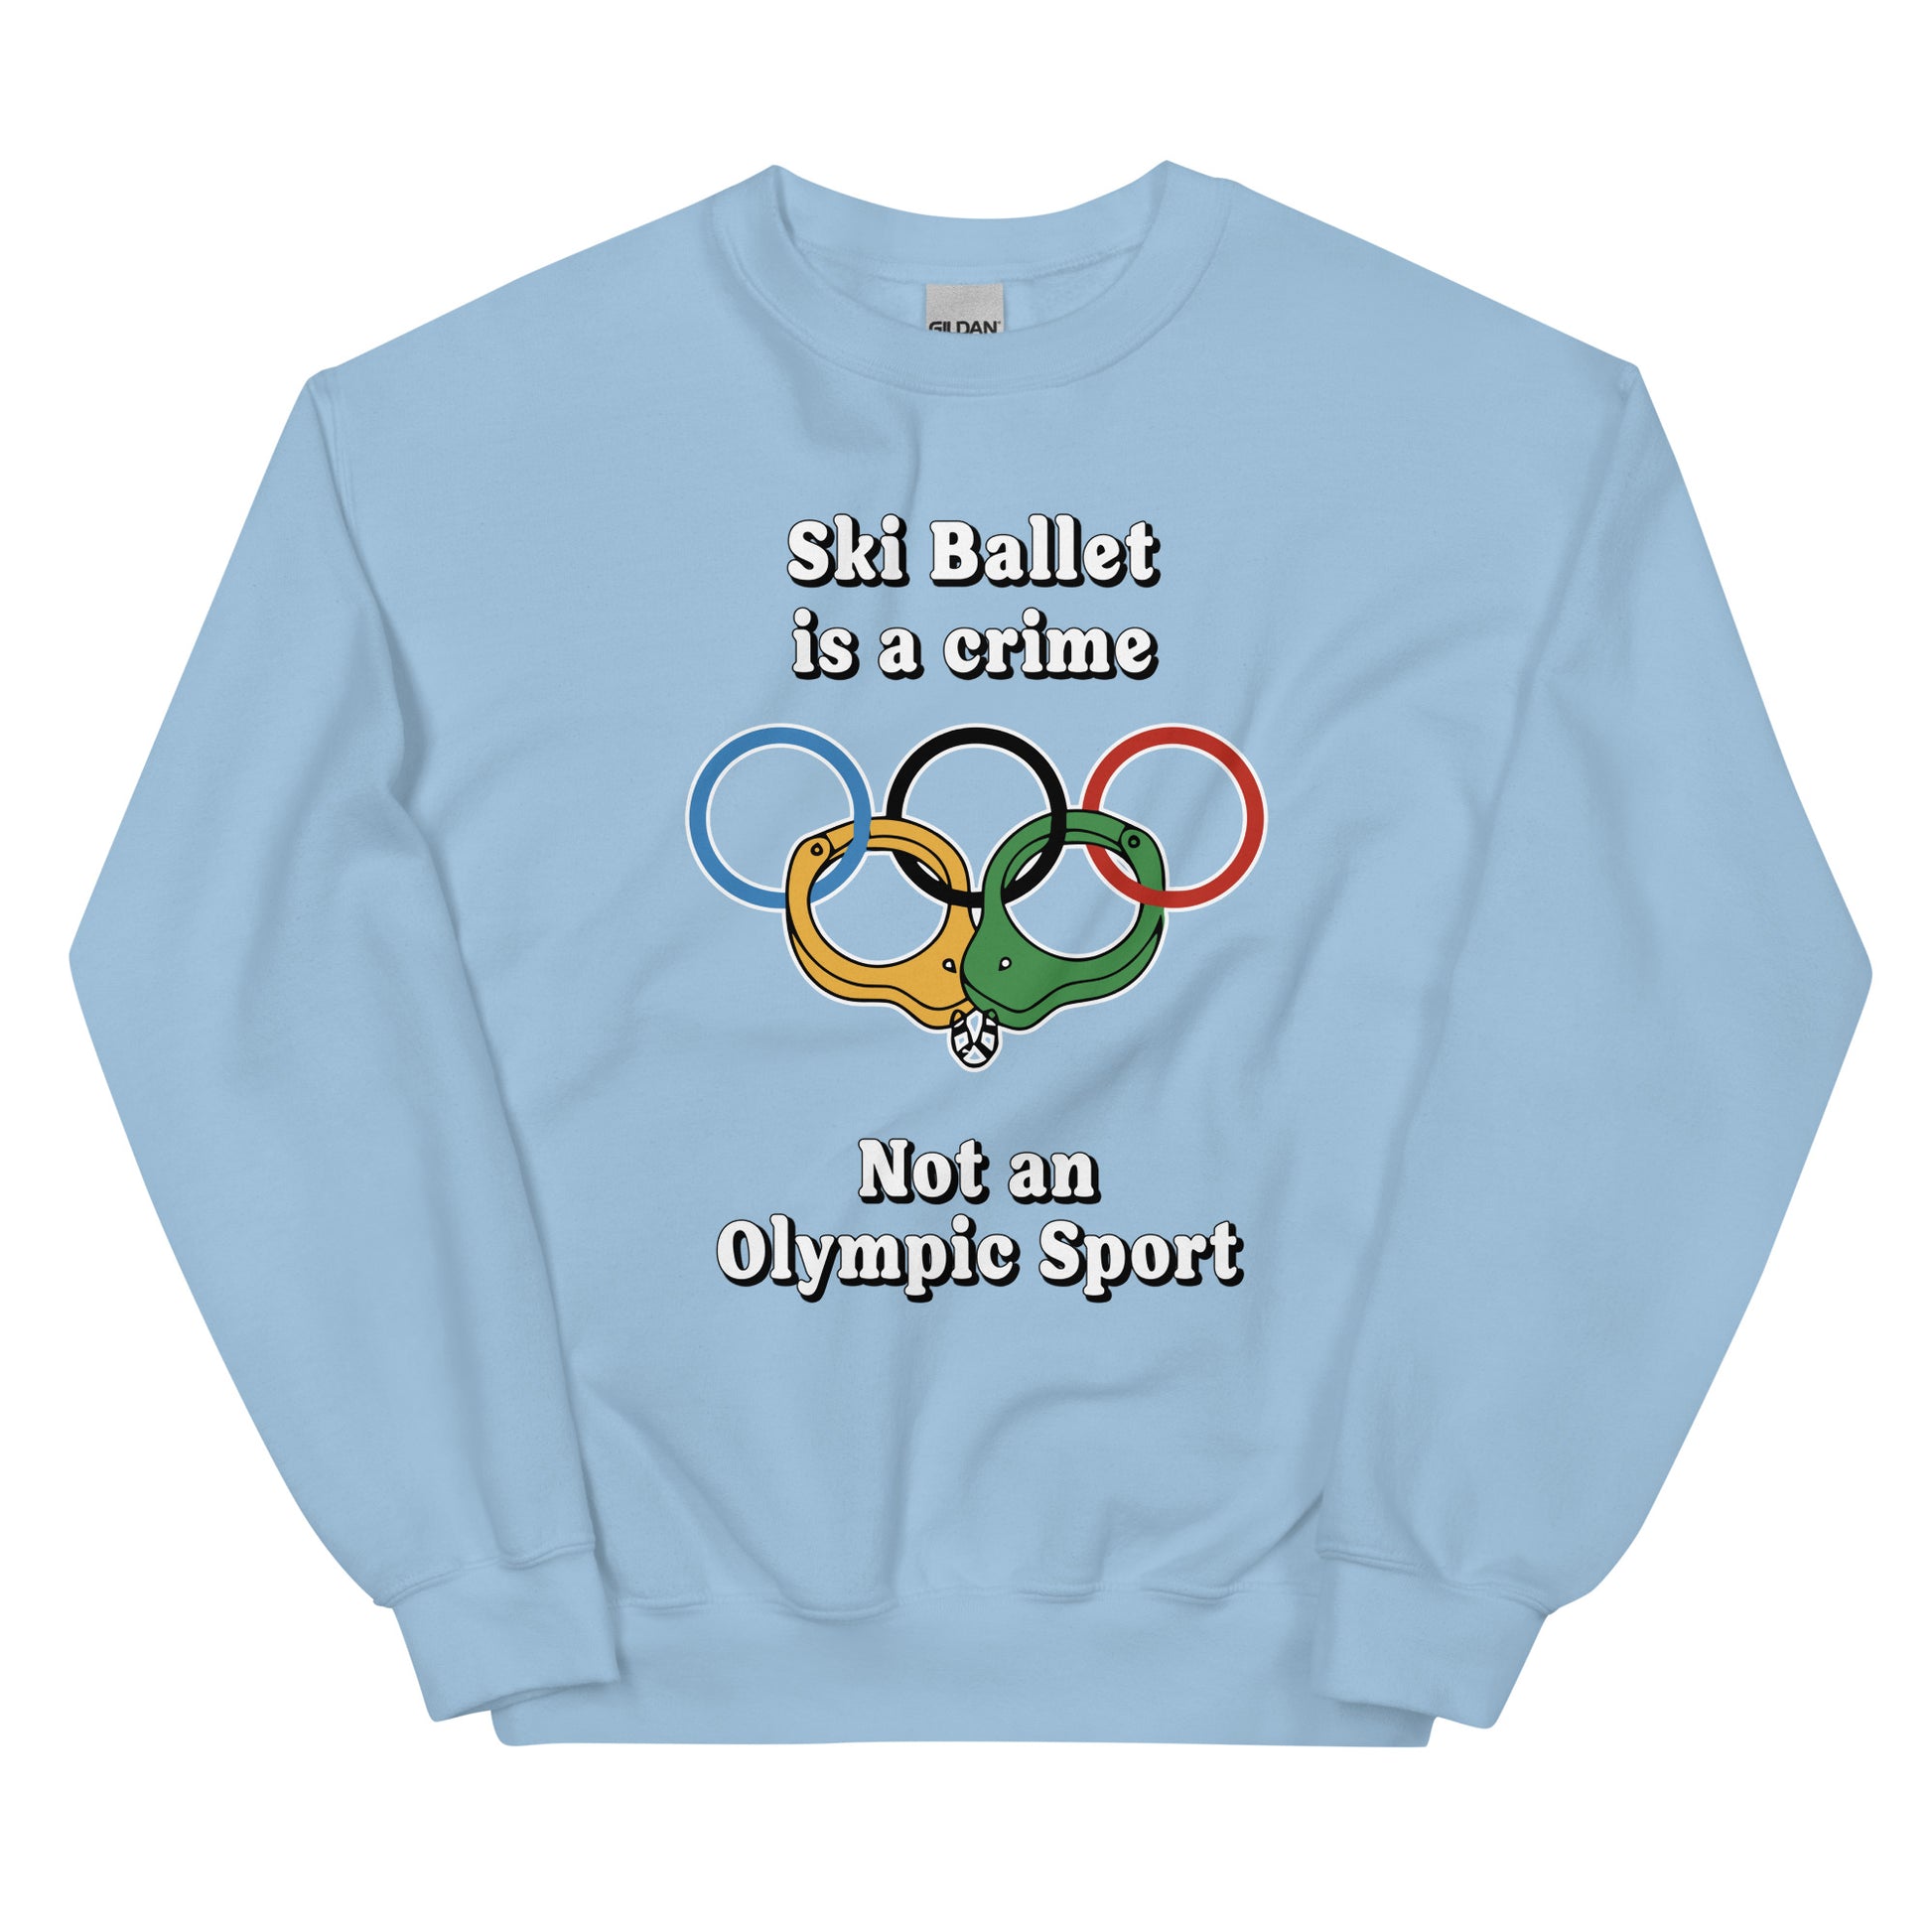 Ski ballet is a crime not an olympic sport design printed on crewneck sweatshirt by Whistler Shirts